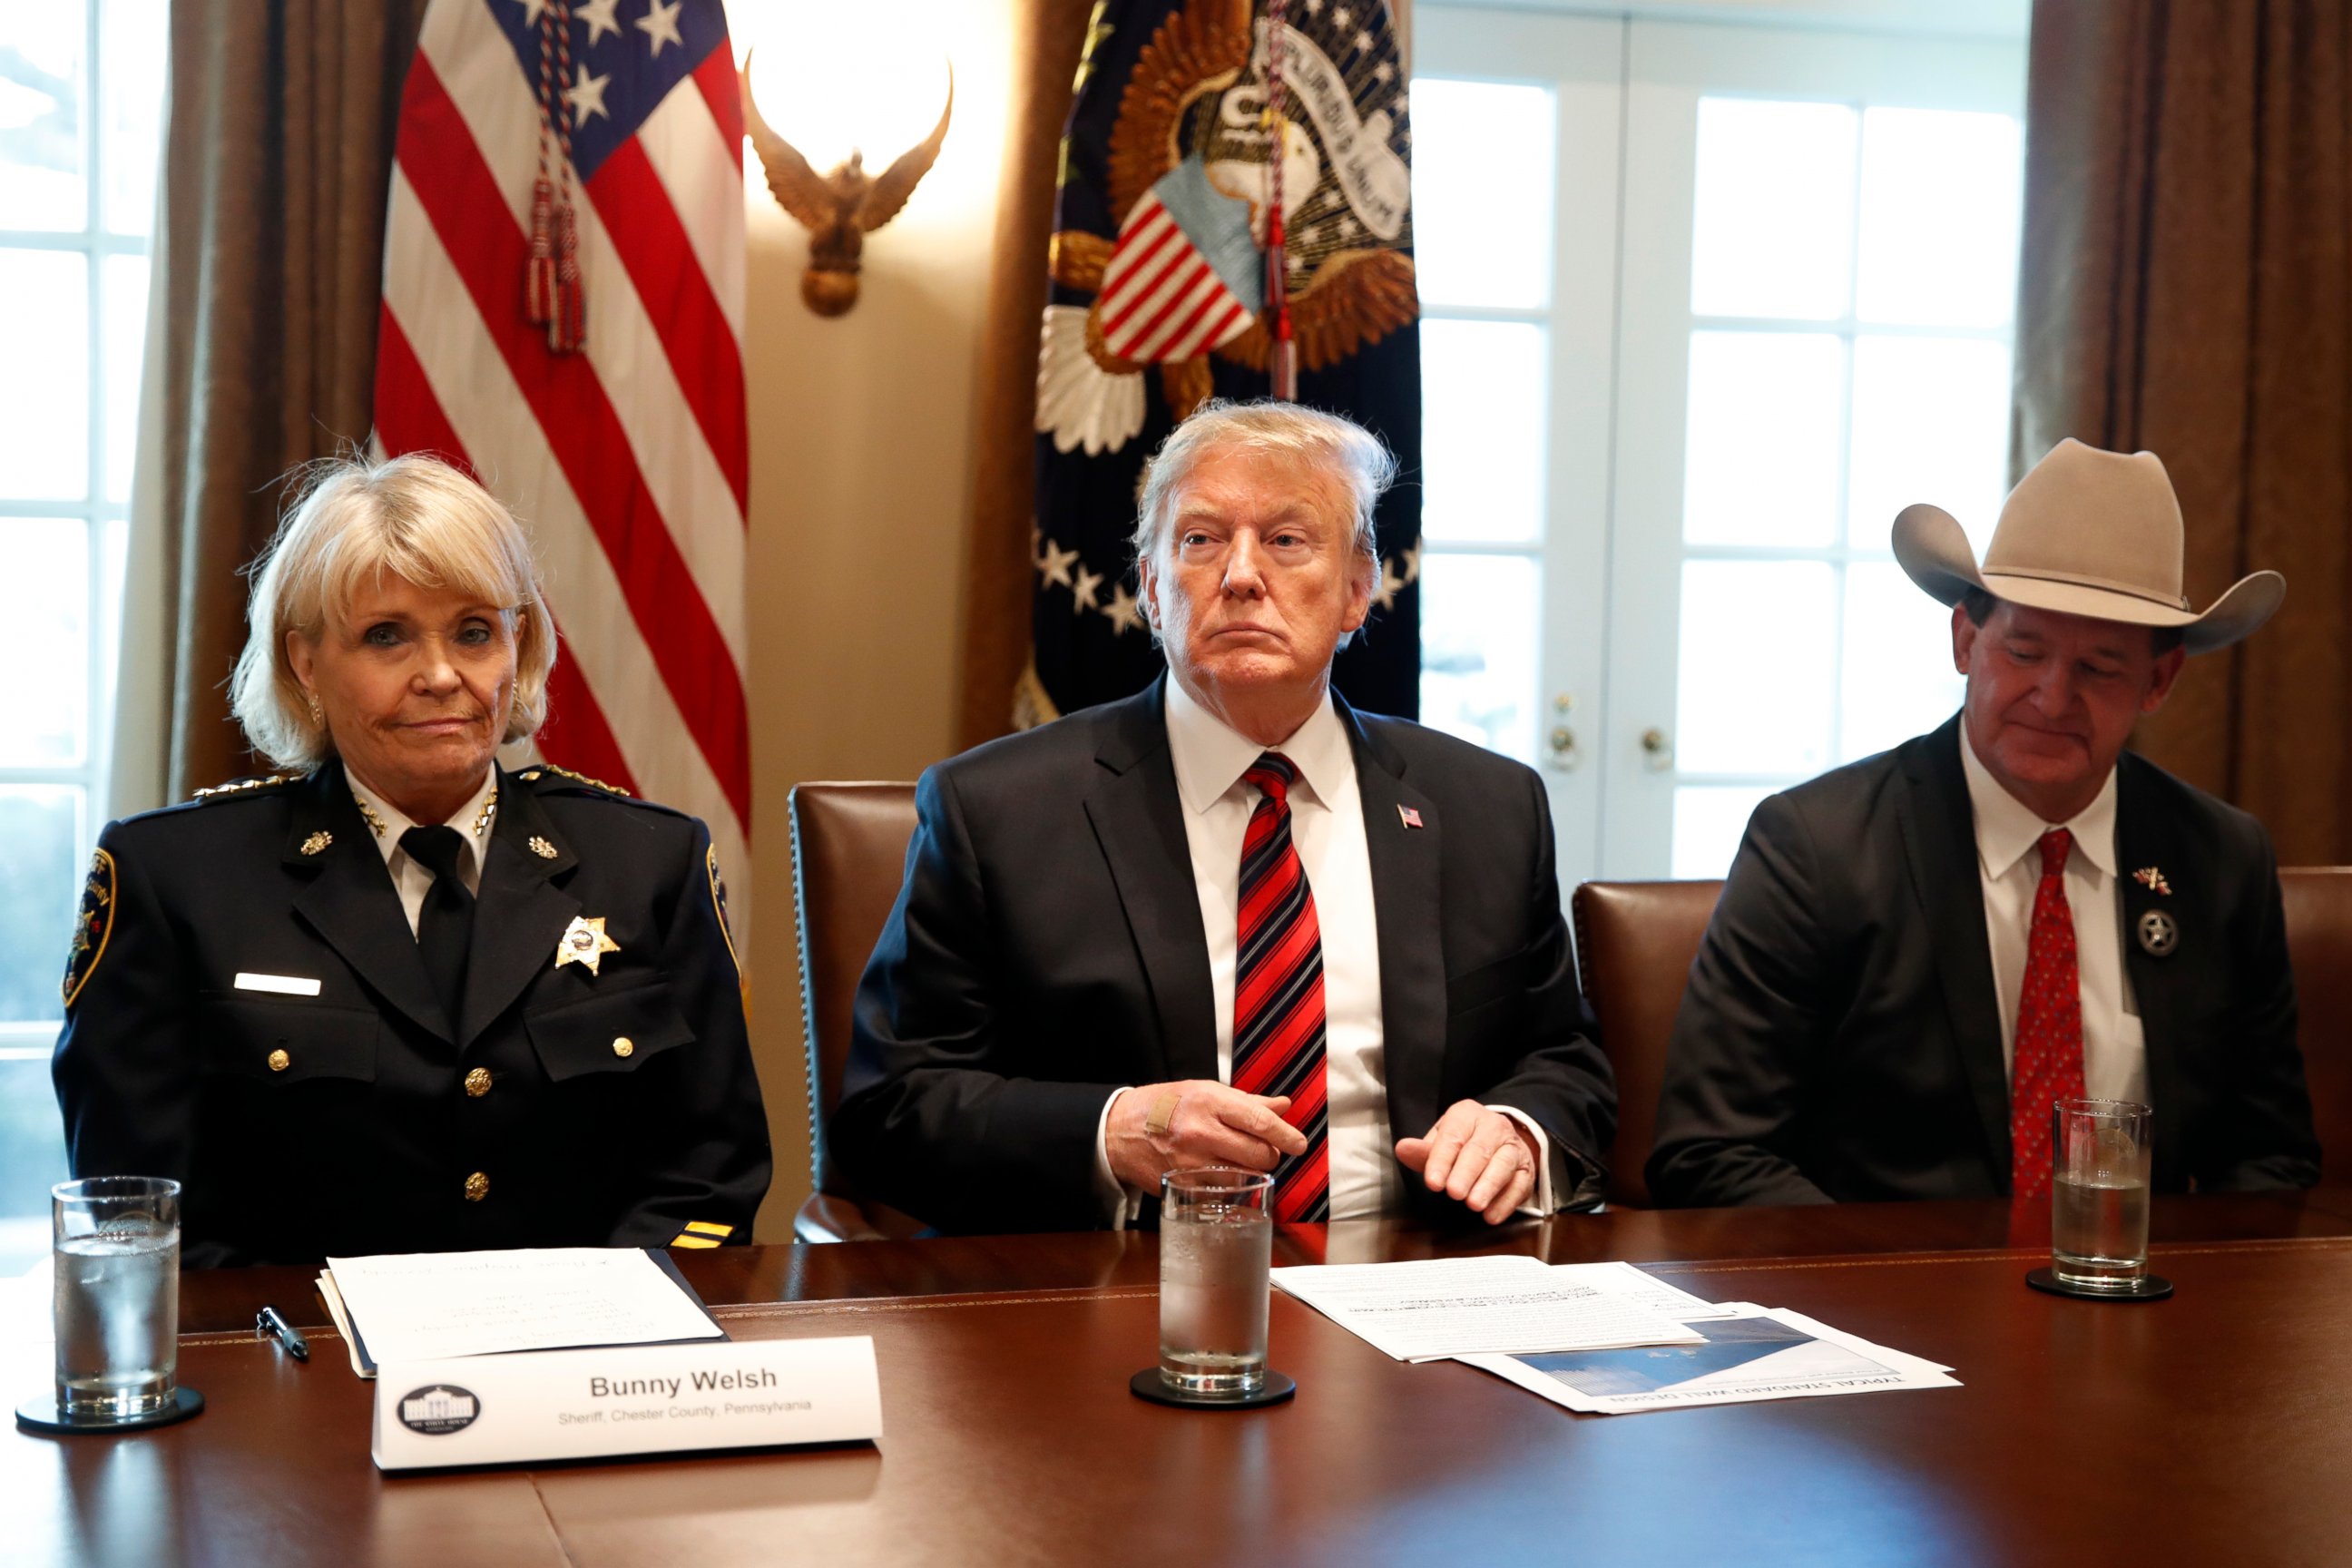 President Donald Trump, with Carolyn "Bunny" Welsh, sheriff of Chester County, Pa., left, and AJ Louderback, sheriff of Jackson County, Texas, attends a roundtable discussion on border security with local leaders, Friday Jan. 11, 2019.